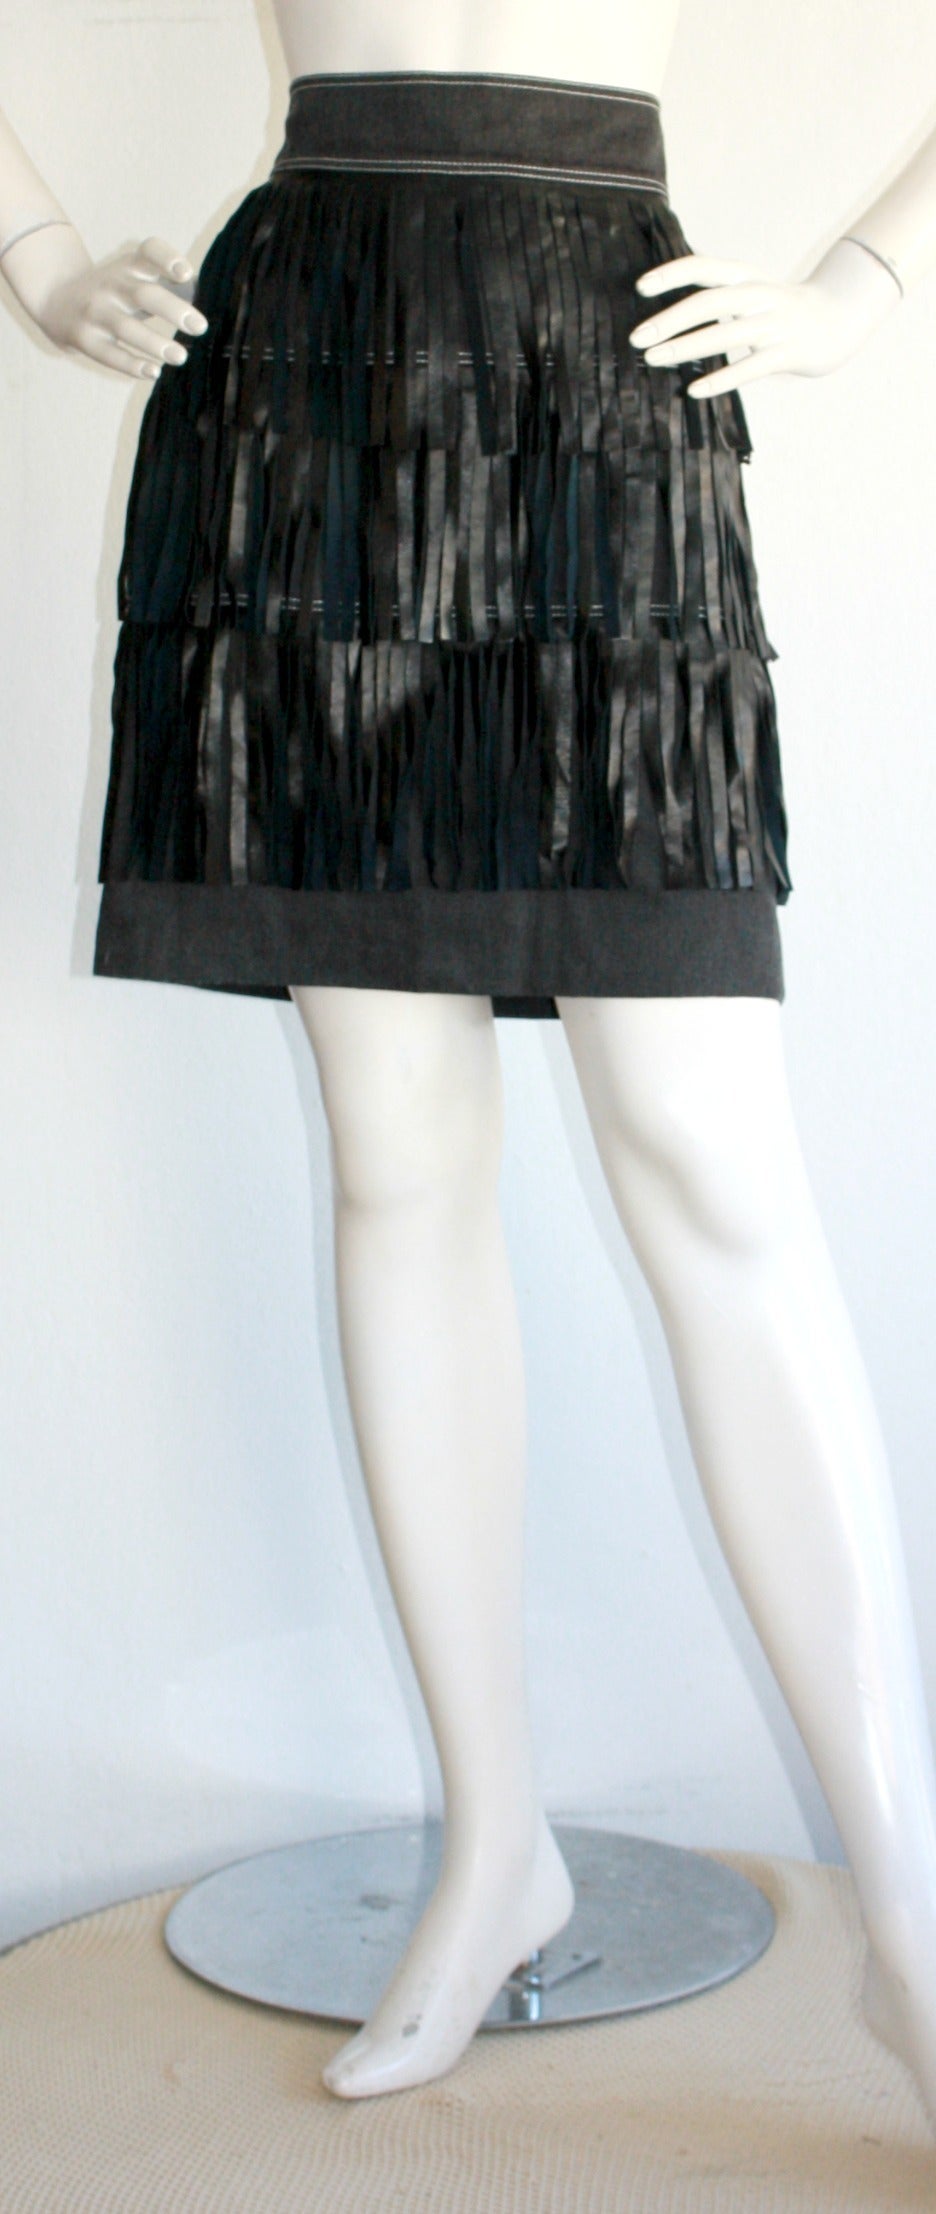 Incredible, and rare, vintage Patrick Kelly denim skirt, with tiers of black leather fringe! Charcoal colored denim. Looks great when walking, or on the dance floor! Easy to transition from day to night. Made in France. In great condition. Marked